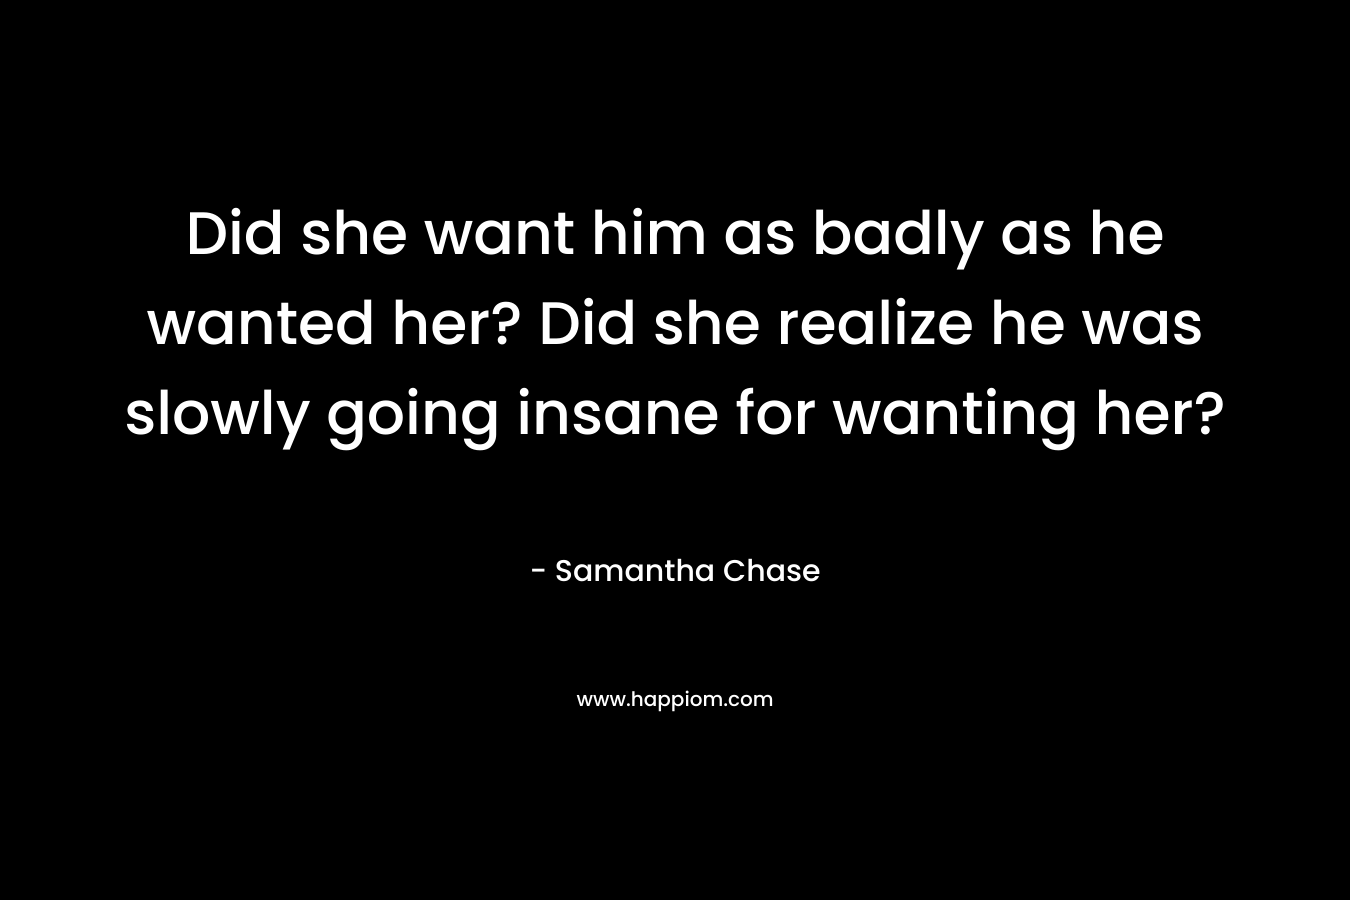 Did she want him as badly as he wanted her? Did she realize he was slowly going insane for wanting her? – Samantha Chase